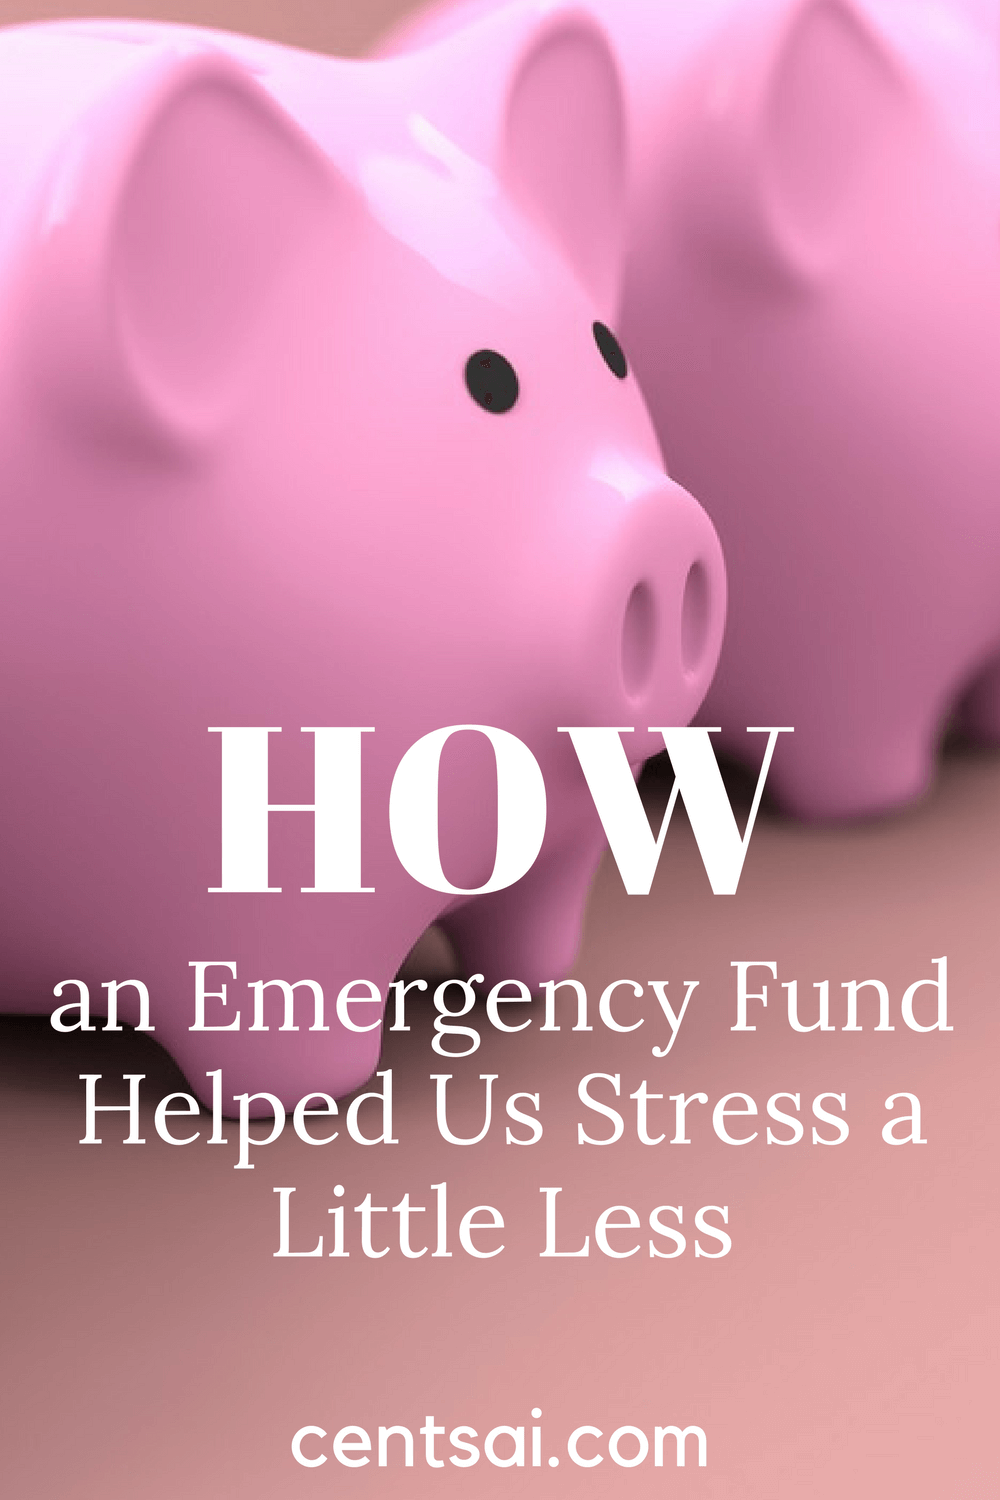 How an Emergency Fund Helped Us Stress a Little Less